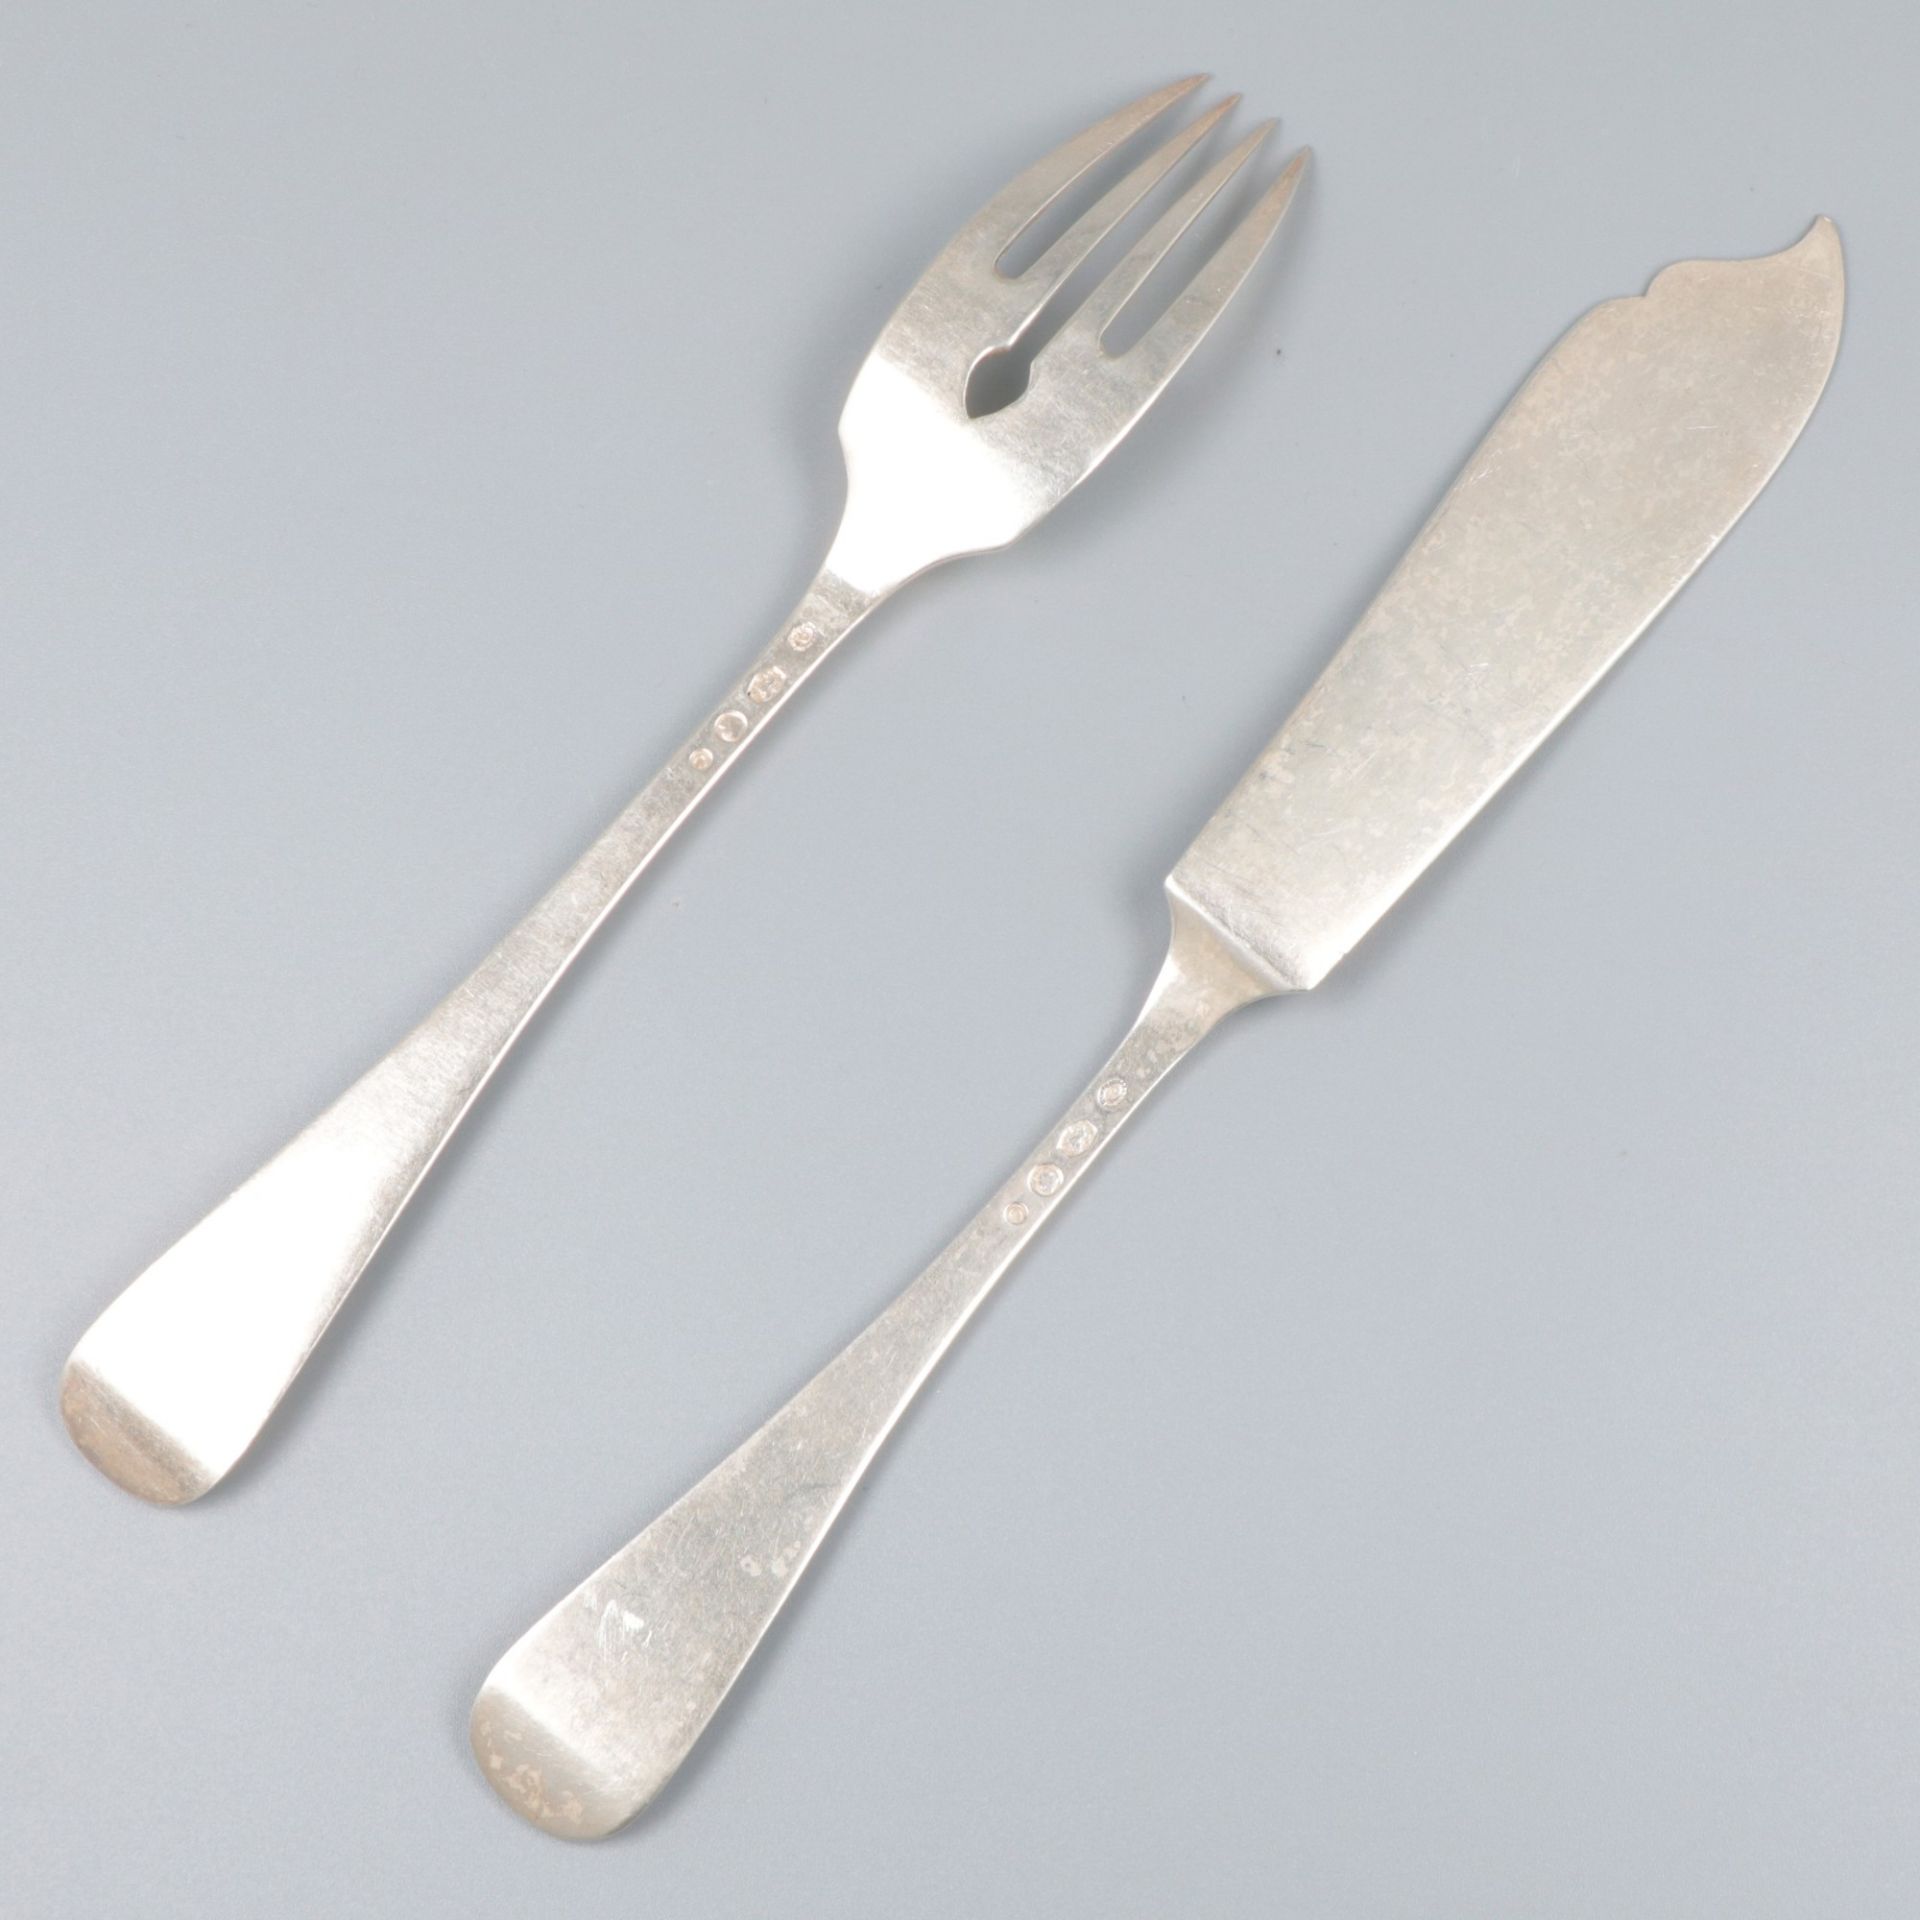 10-piece fish cutlery "Haags Lofje", silver. - Image 3 of 6